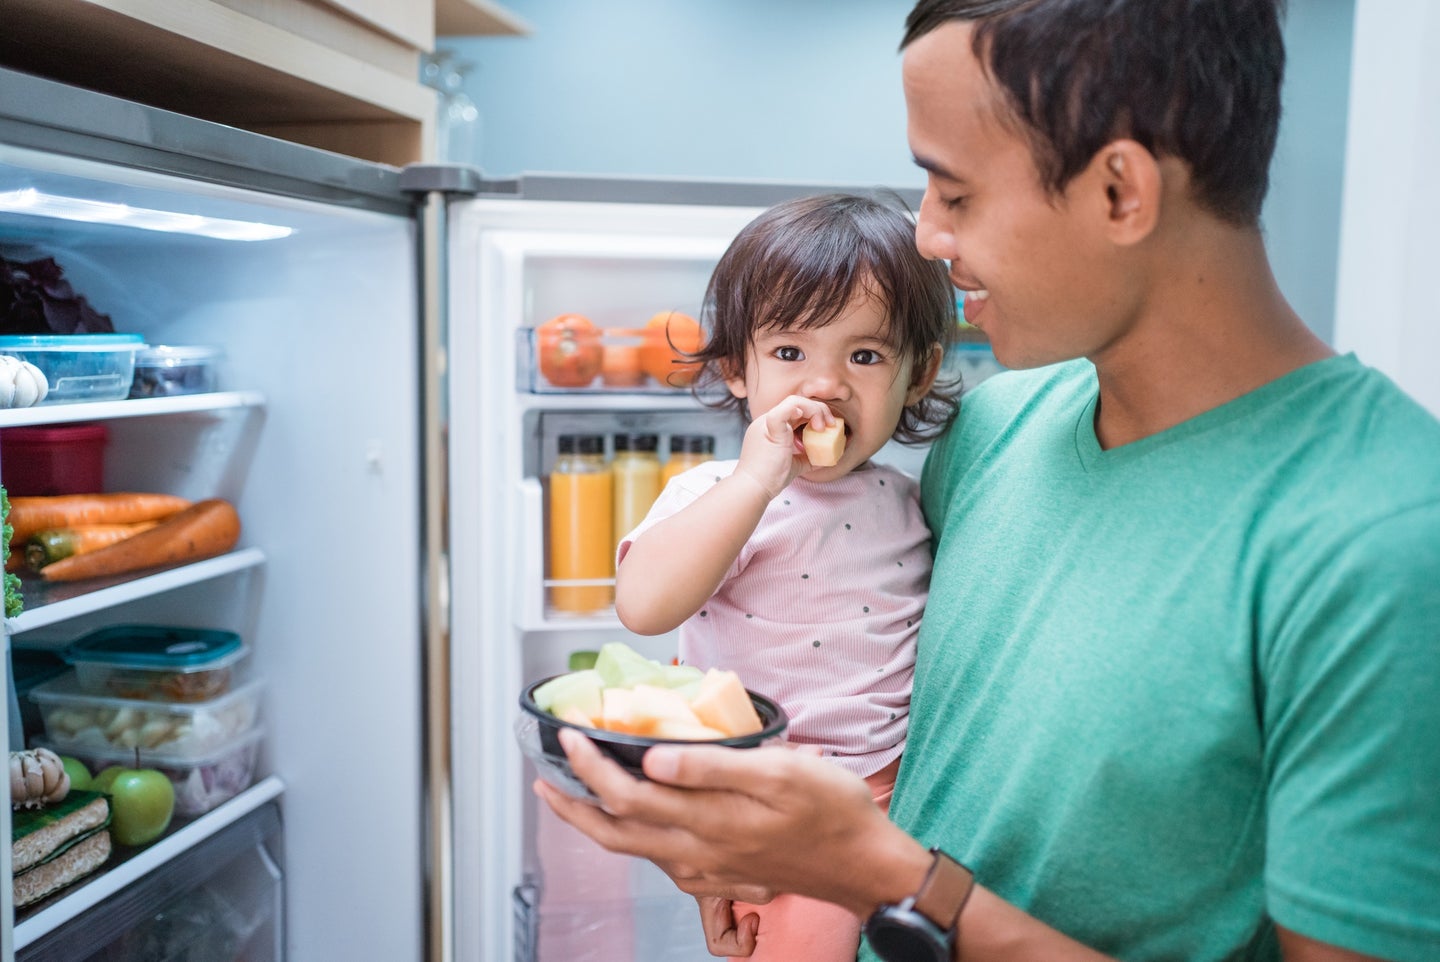 Brown-skinned parent in green short and baby in pink onesie eating fruit in front of an open fridge, which is full of HFCs